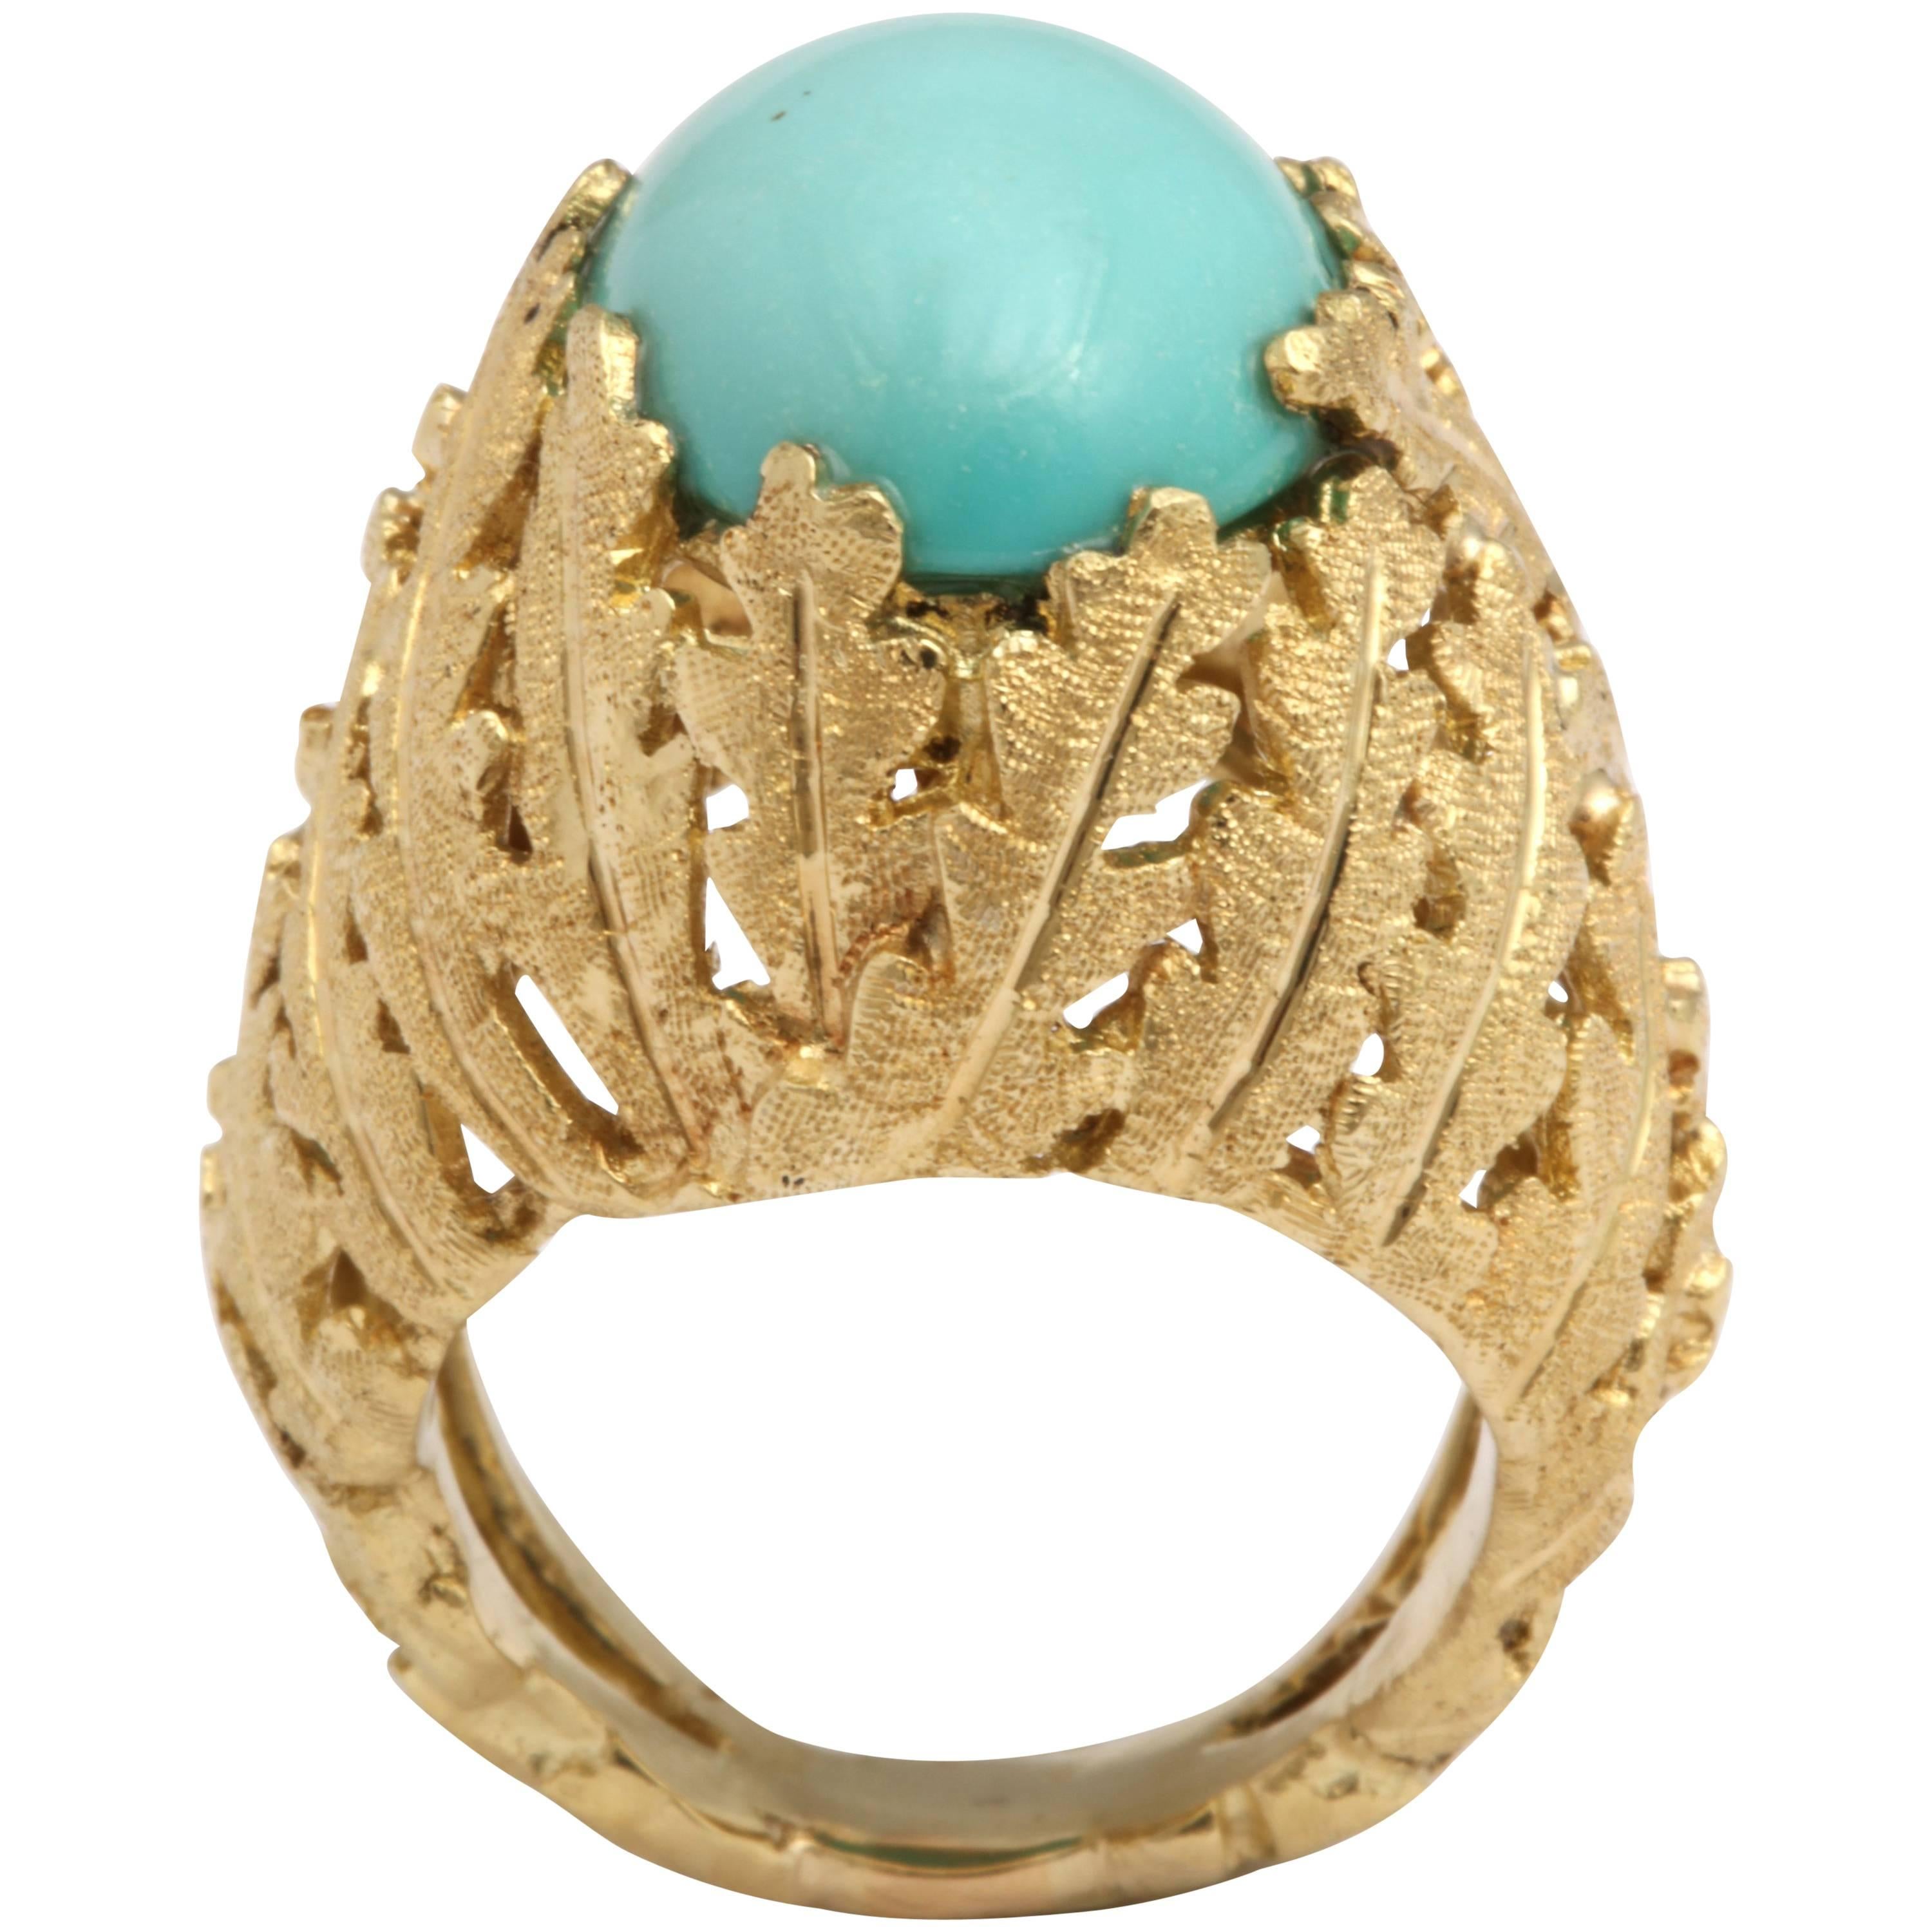 Turquoise and Gold Foliate Ring